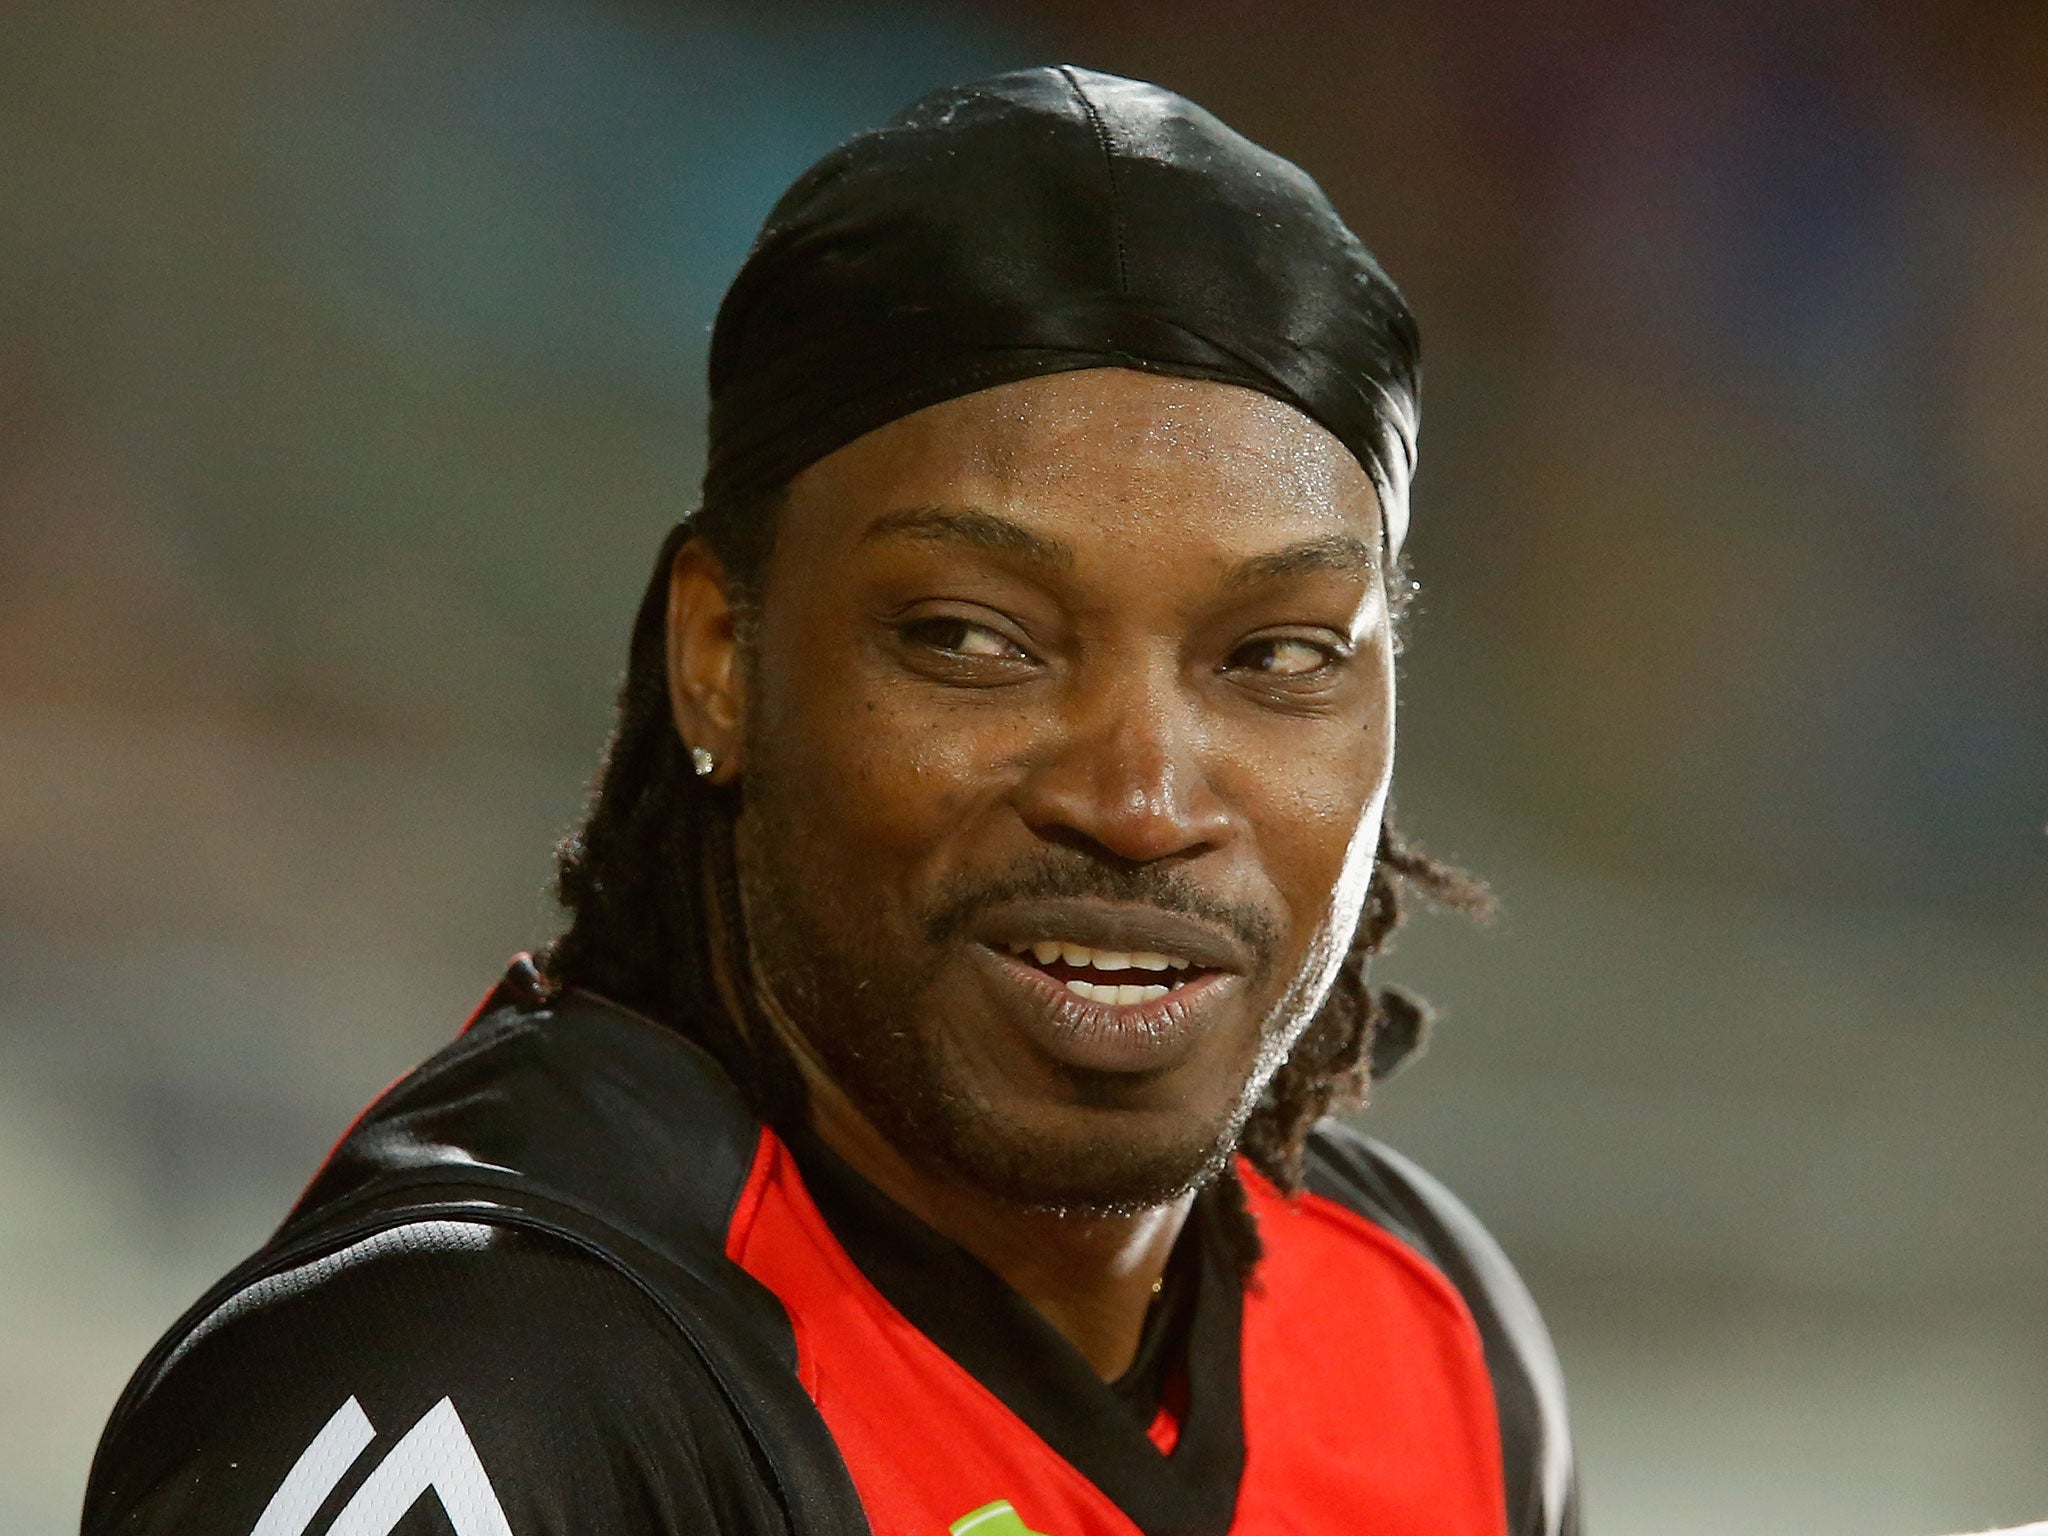 Chris Gayle repeats infamous 'don't blush' comment in interview with